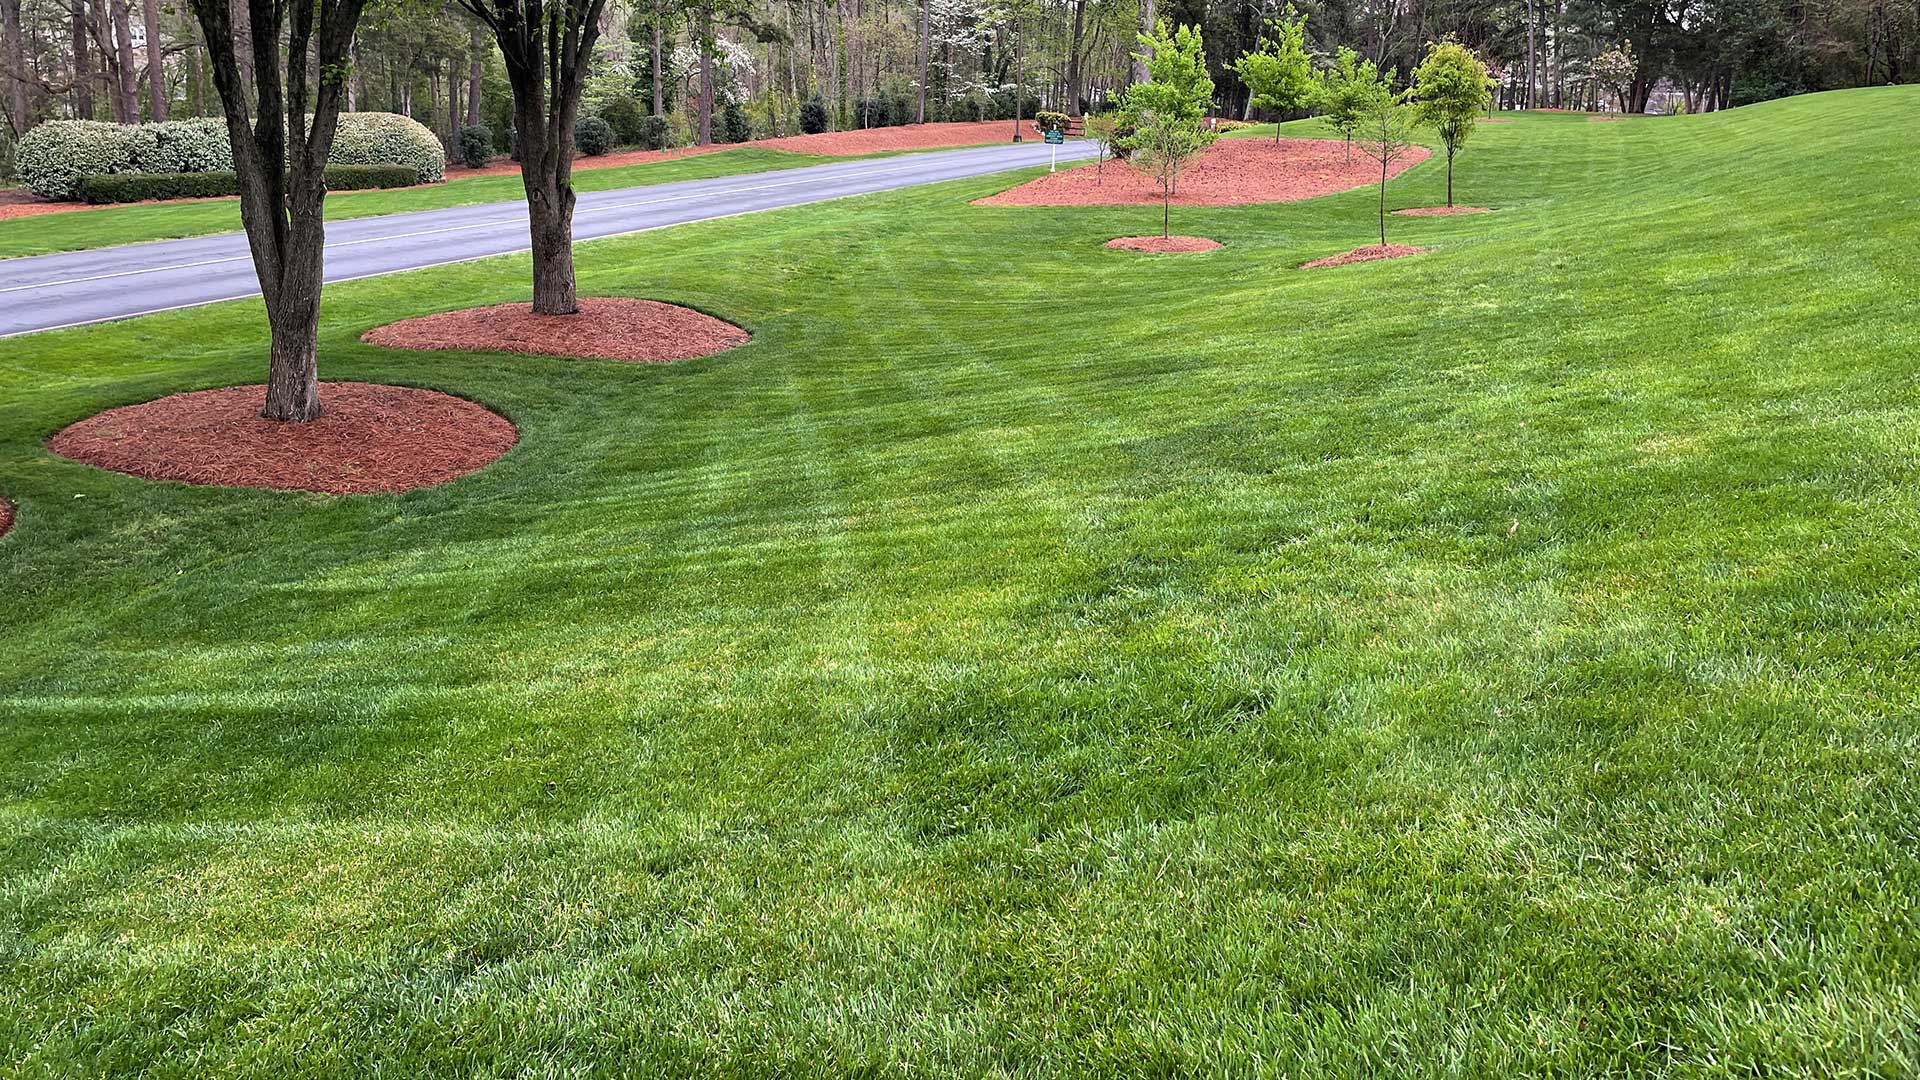 Large commercial property in Pineville, NC that our team just completed their weekly lawn maintenance.